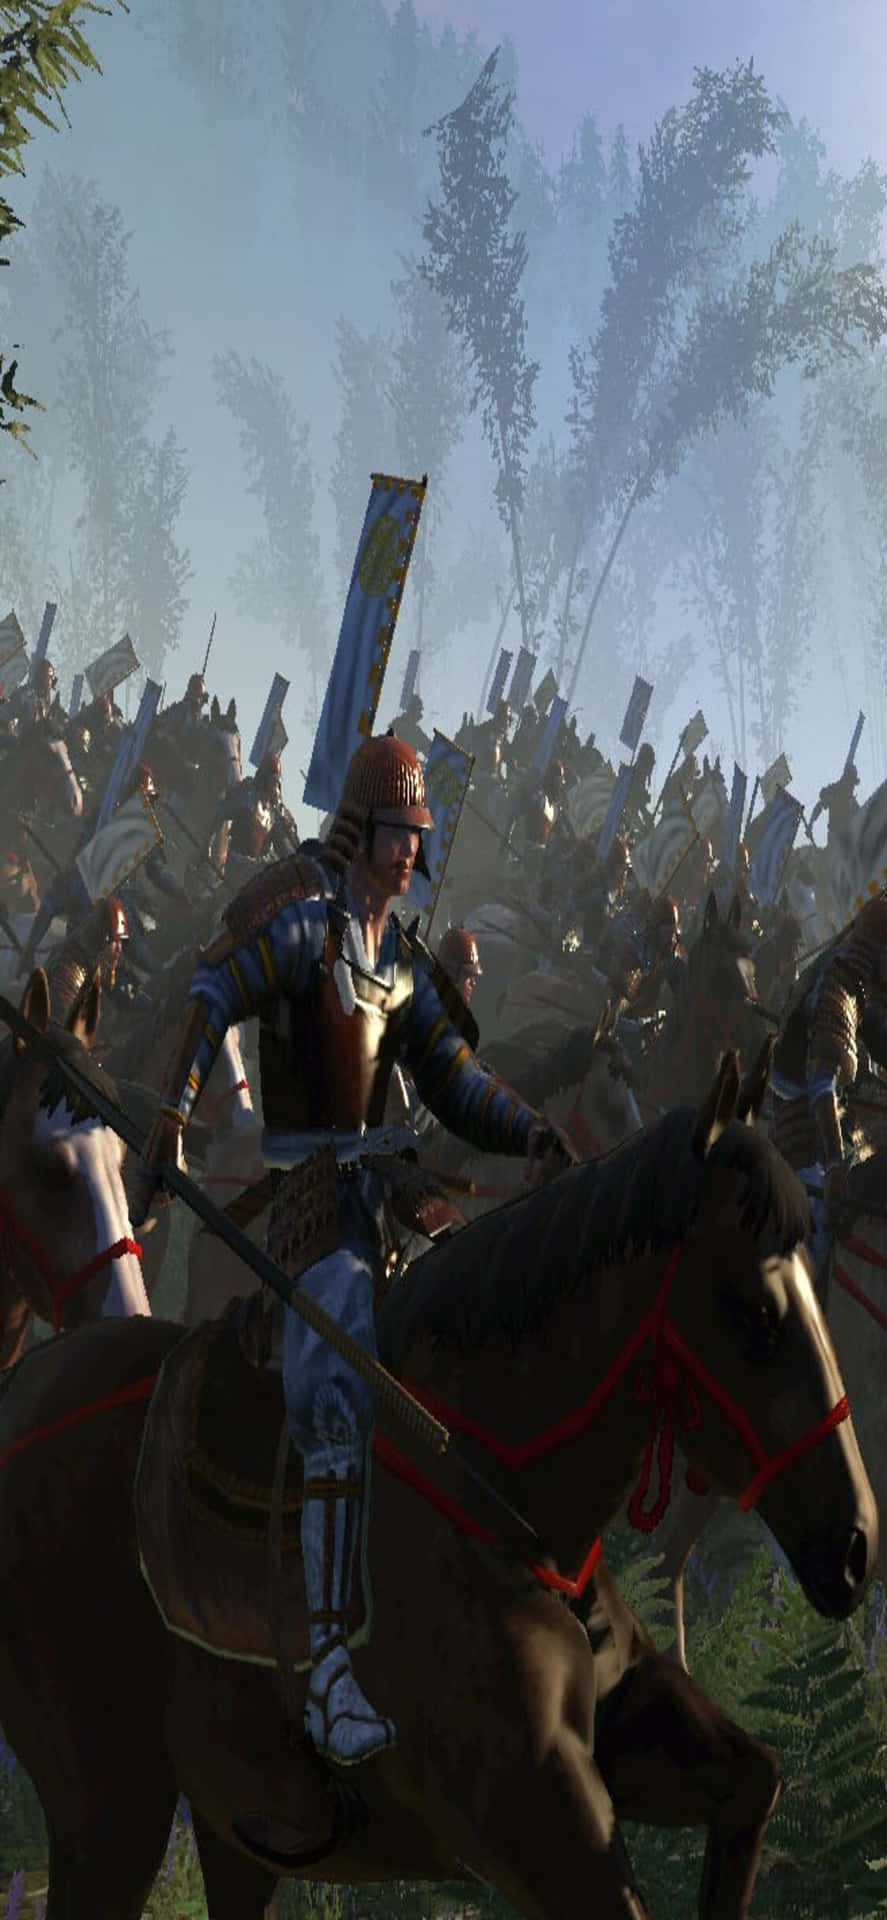 Conquer Total War Rome 2 in Epic Detail on iPhone Xs